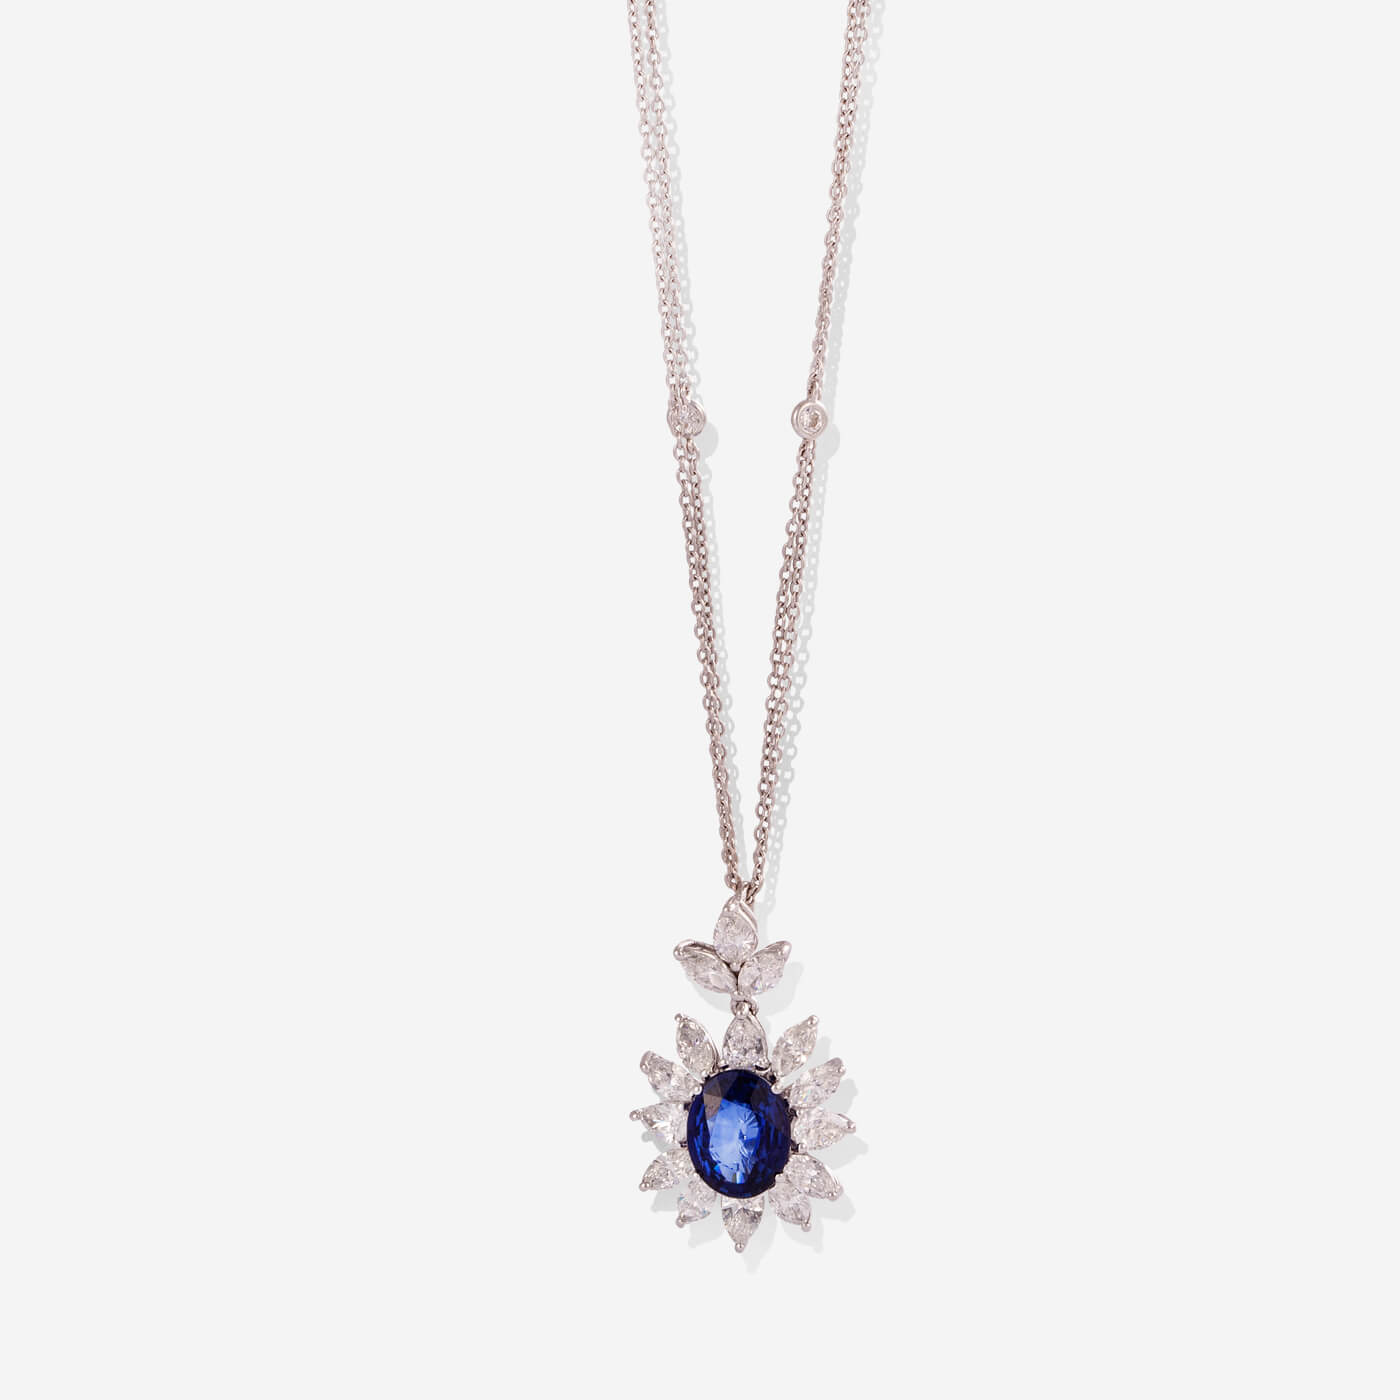 White Gold Flower Sapphire With Diamonds Necklace - Ref: RG03153